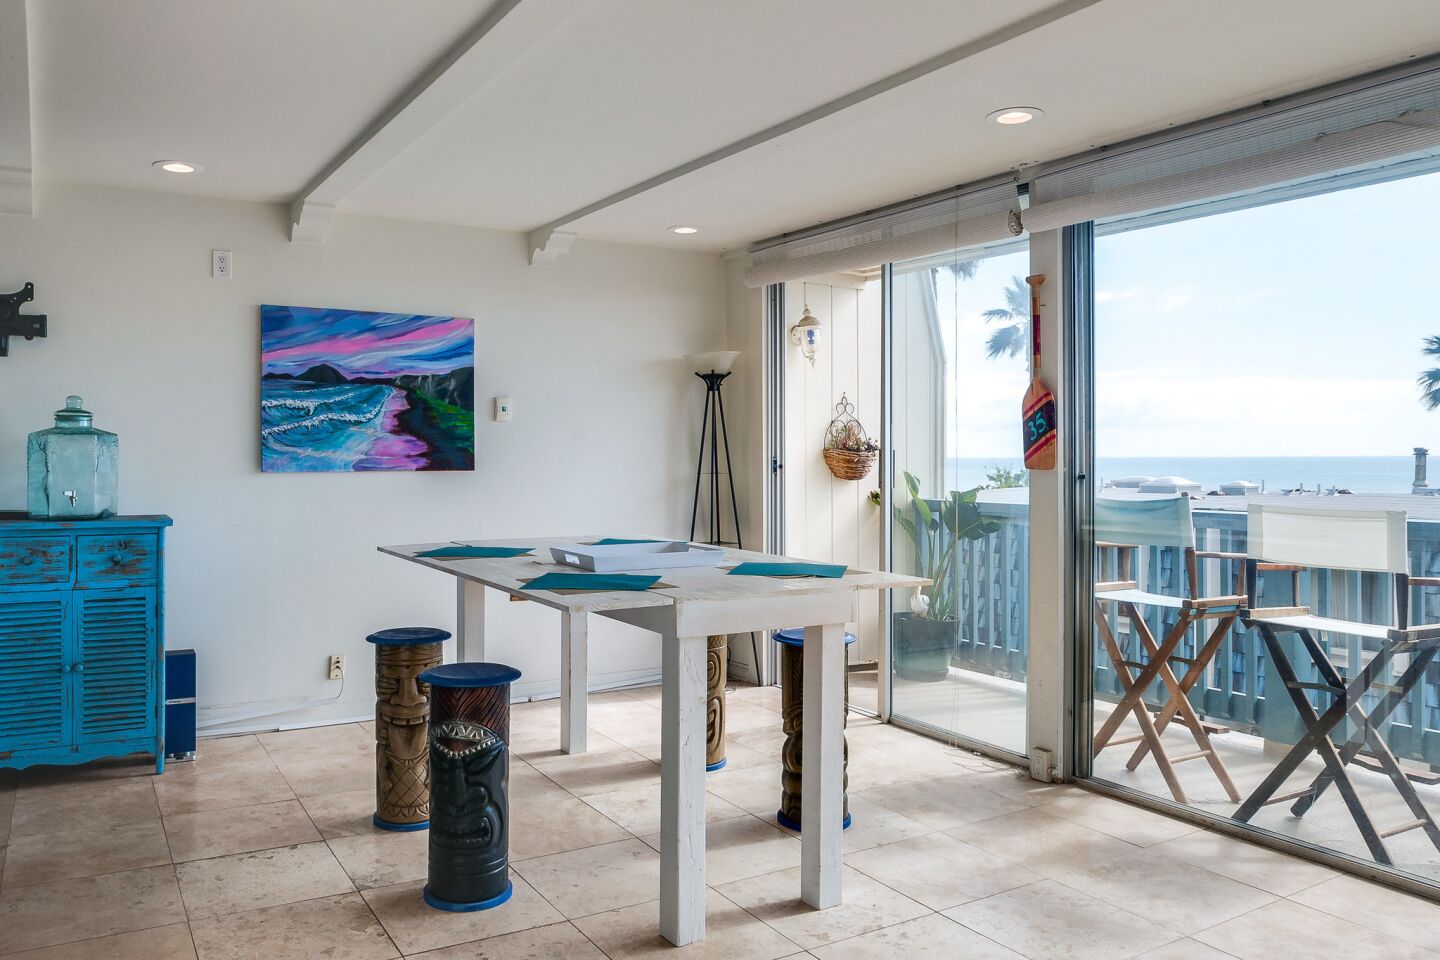 The two-story condo in Malibu takes in panoramic ocean views.